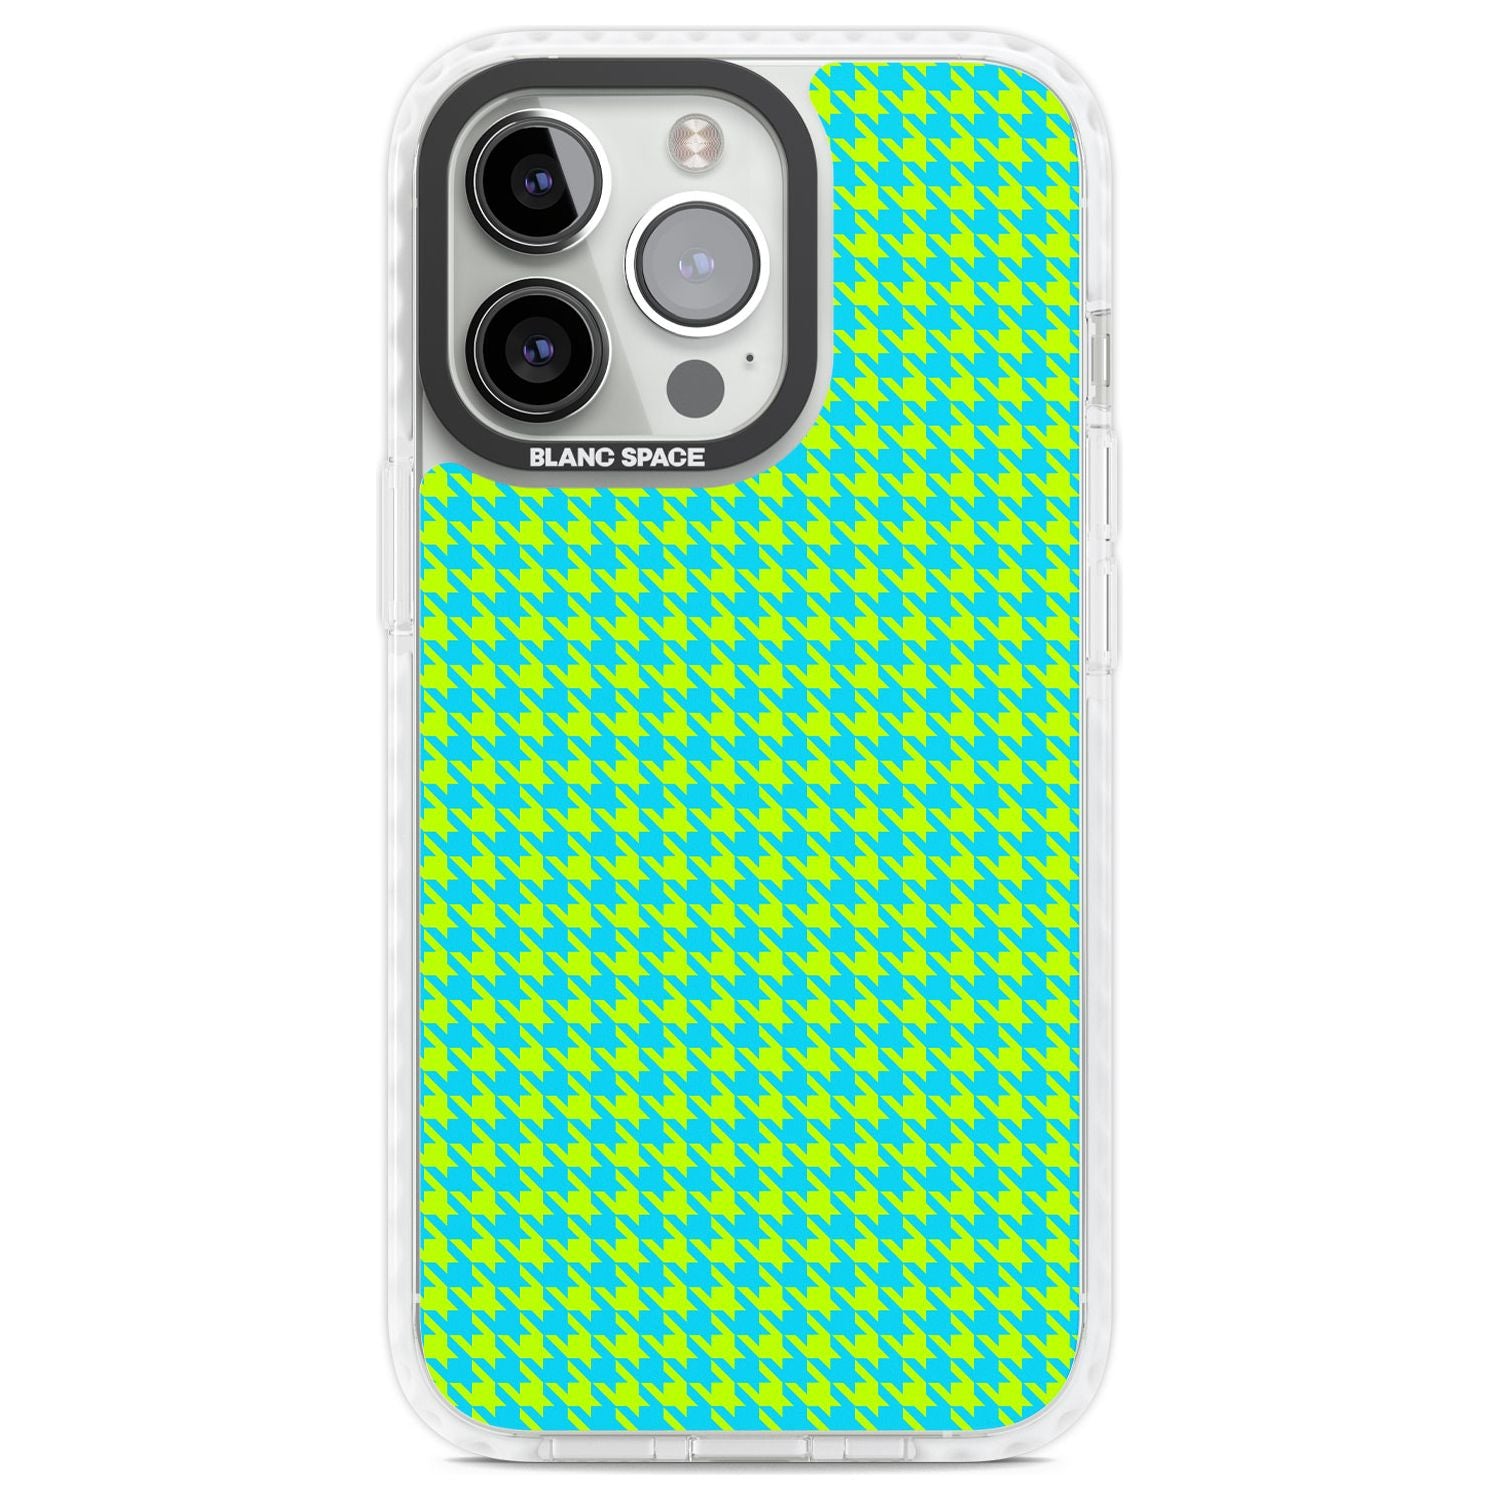 Neon Lime & Turquoise Houndstooth Pattern Phone Case iPhone 13 Pro / Impact Case,iPhone 14 Pro / Impact Case,iPhone 15 Pro Max / Impact Case,iPhone 15 Pro / Impact Case Blanc Space